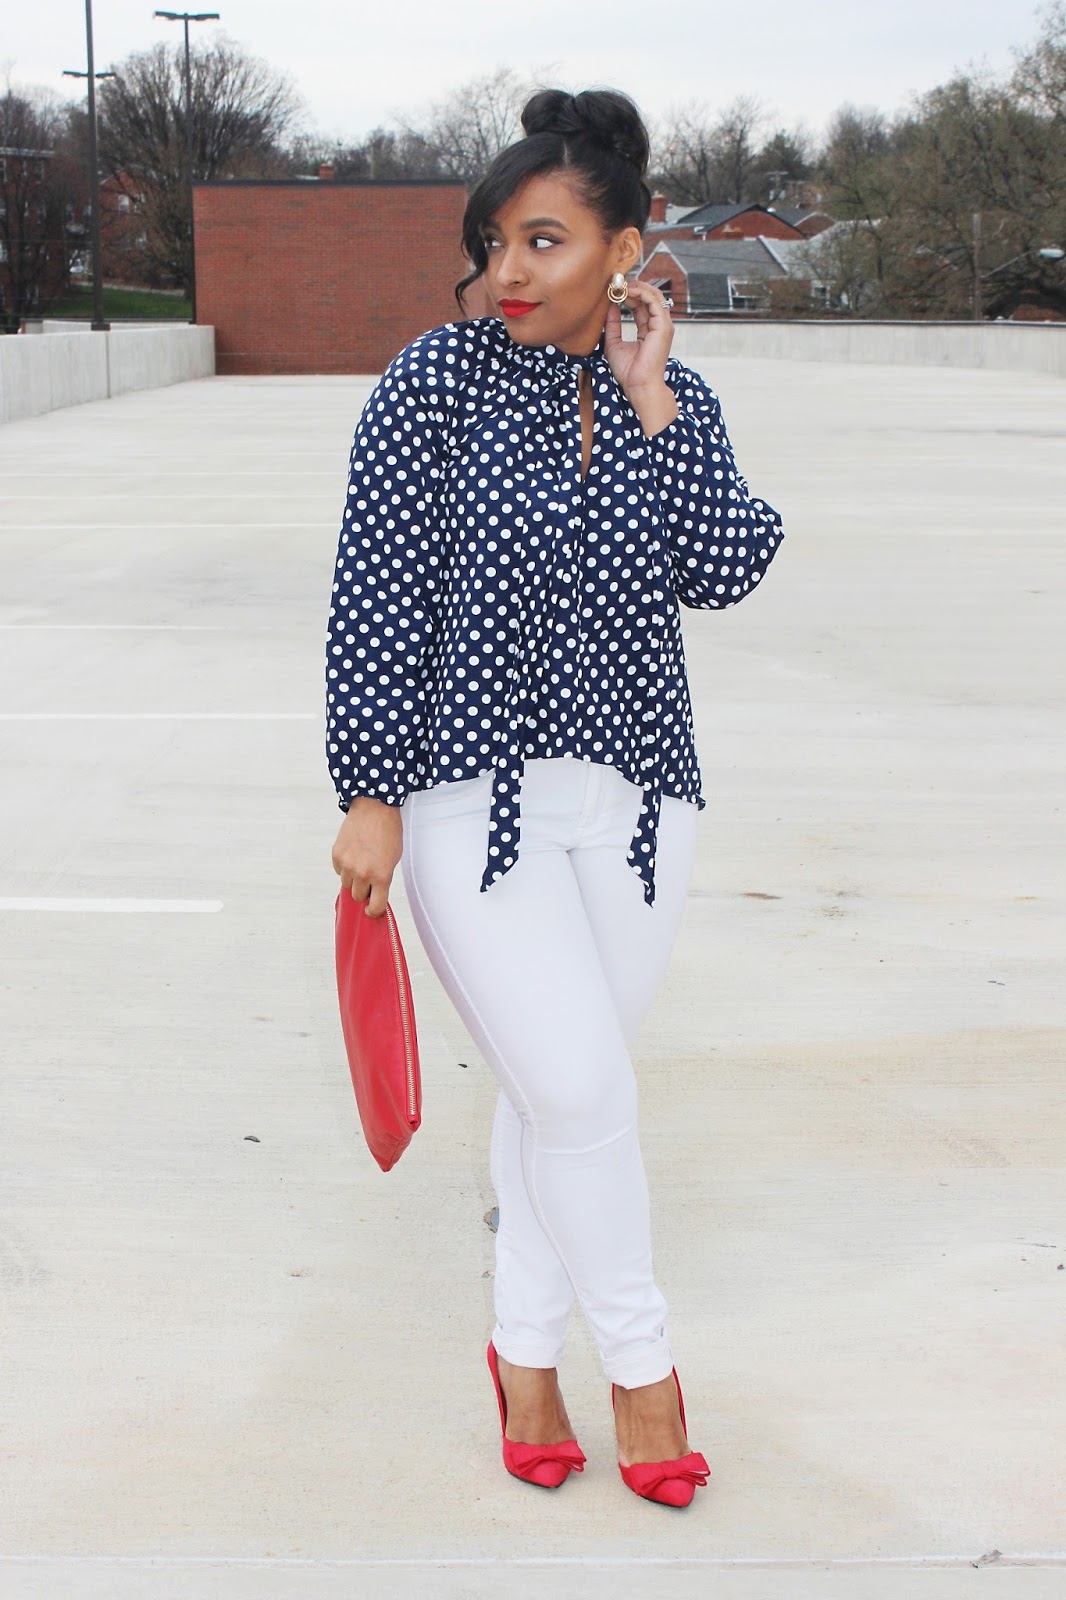 necktie blouse, polka dots, blue and red, spring looks, white denim